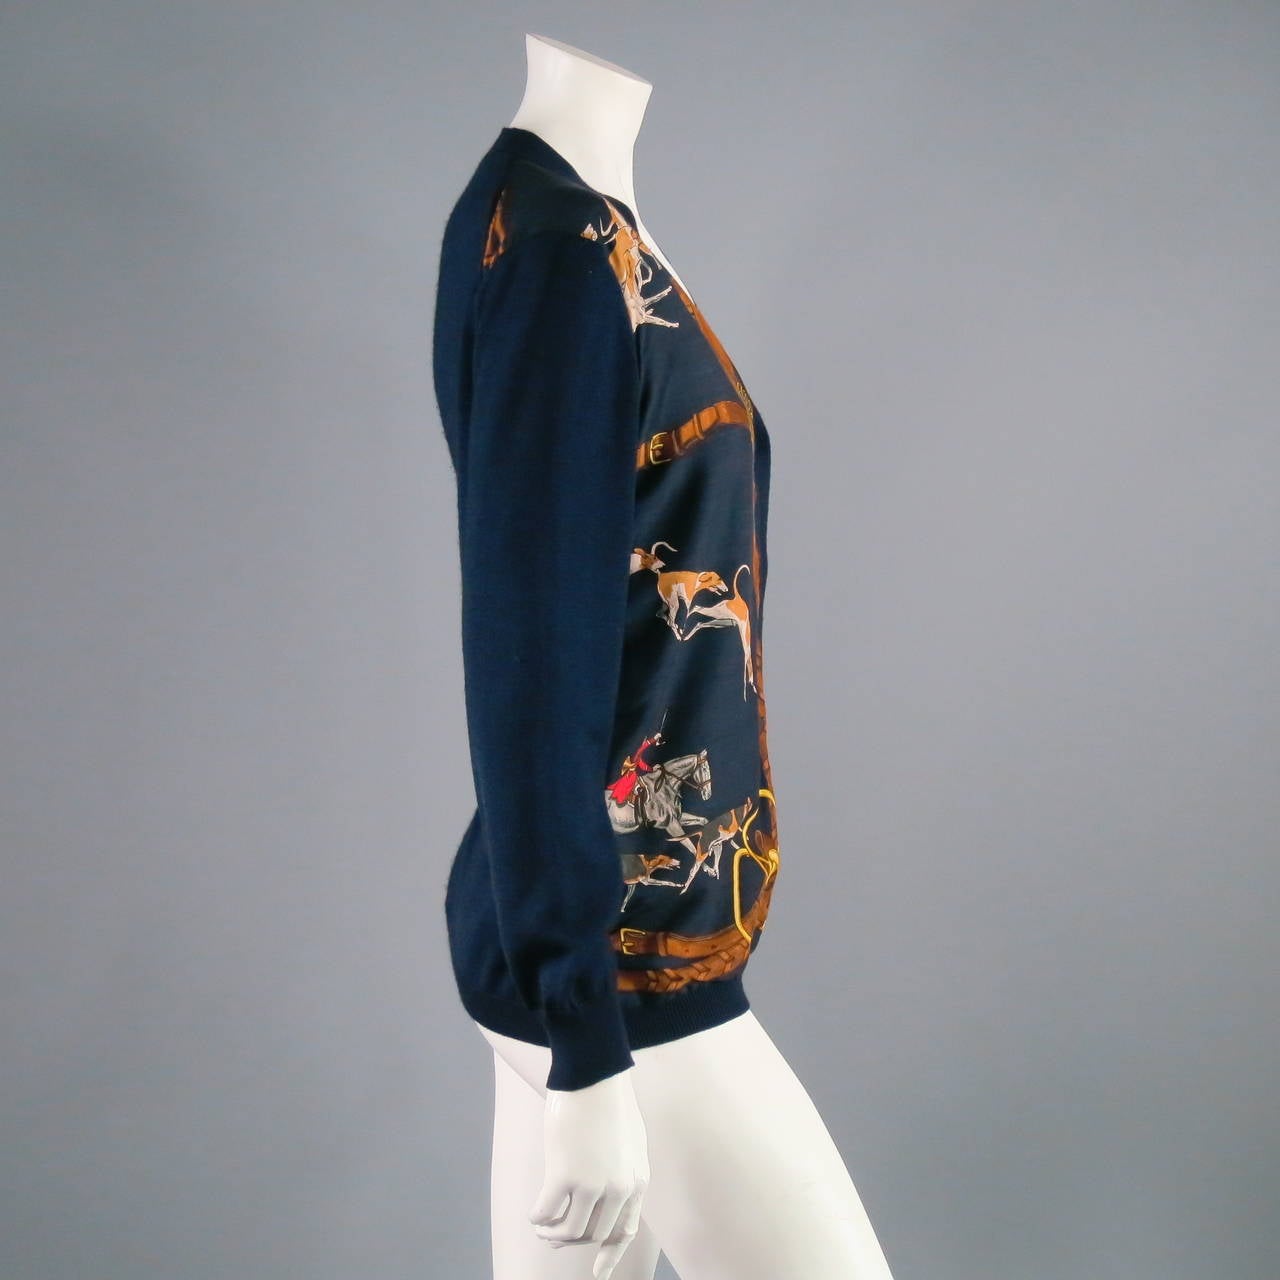 Navy Hermes scarf print cardigan made of cashmere and silk. Made in France.
 
Excellent Pre-Owned Condition
 
Measurements:
Shoulder to shoulder: 16.5 inches
Bust: 18 inches
Waist: 18 inches
Length of cardigan: 26 inches
Length of sleeve: